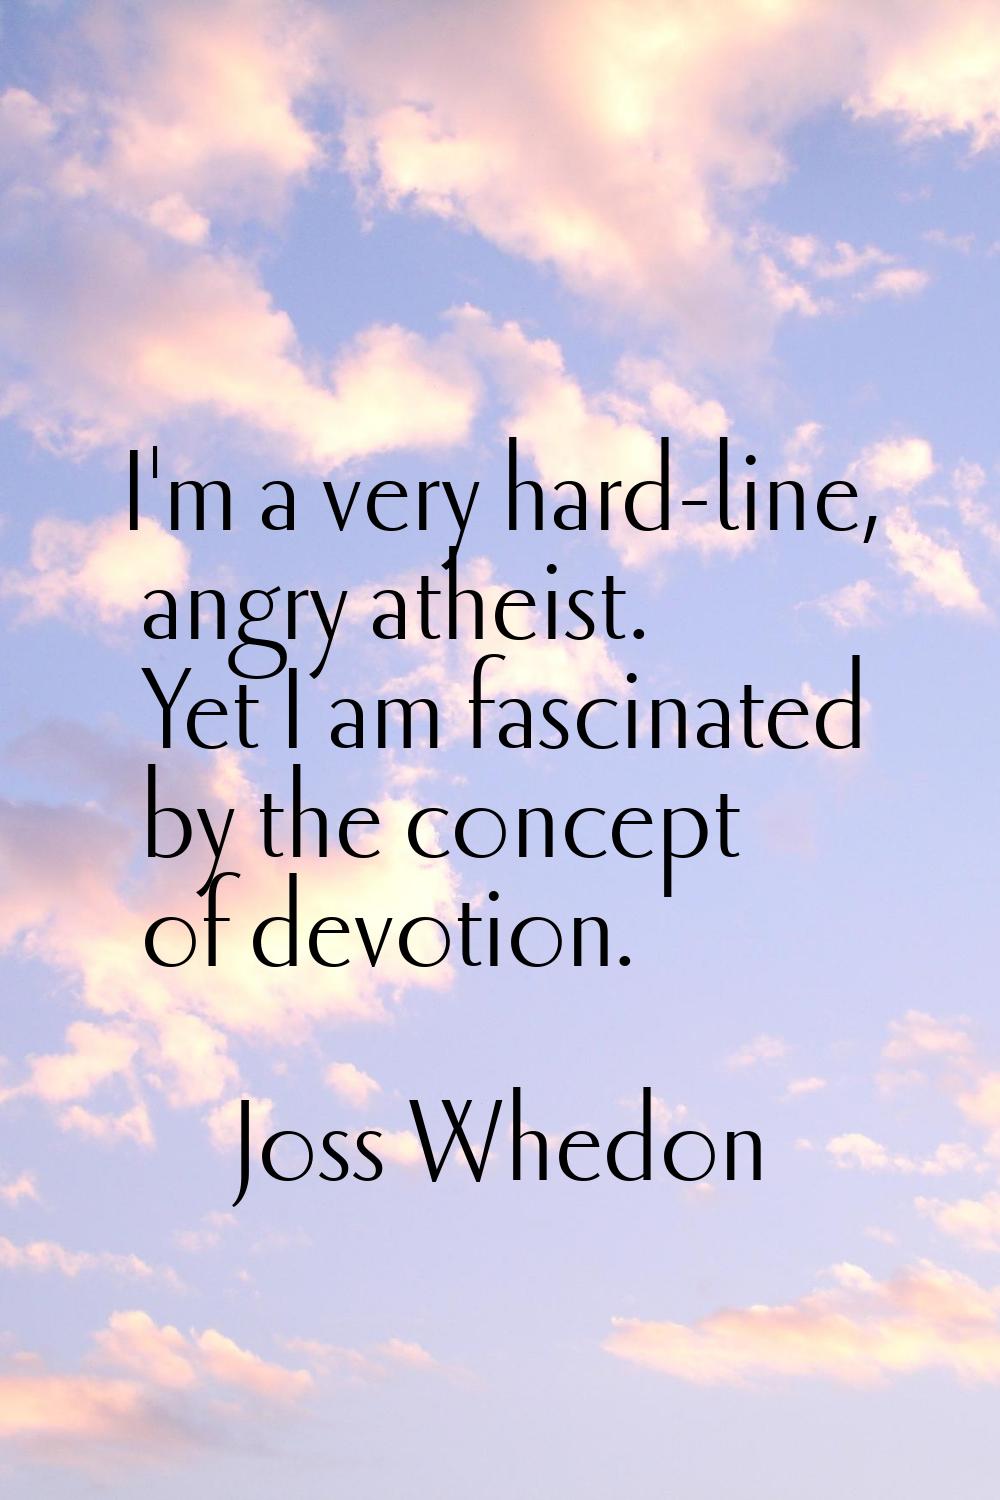 I'm a very hard-line, angry atheist. Yet I am fascinated by the concept of devotion.